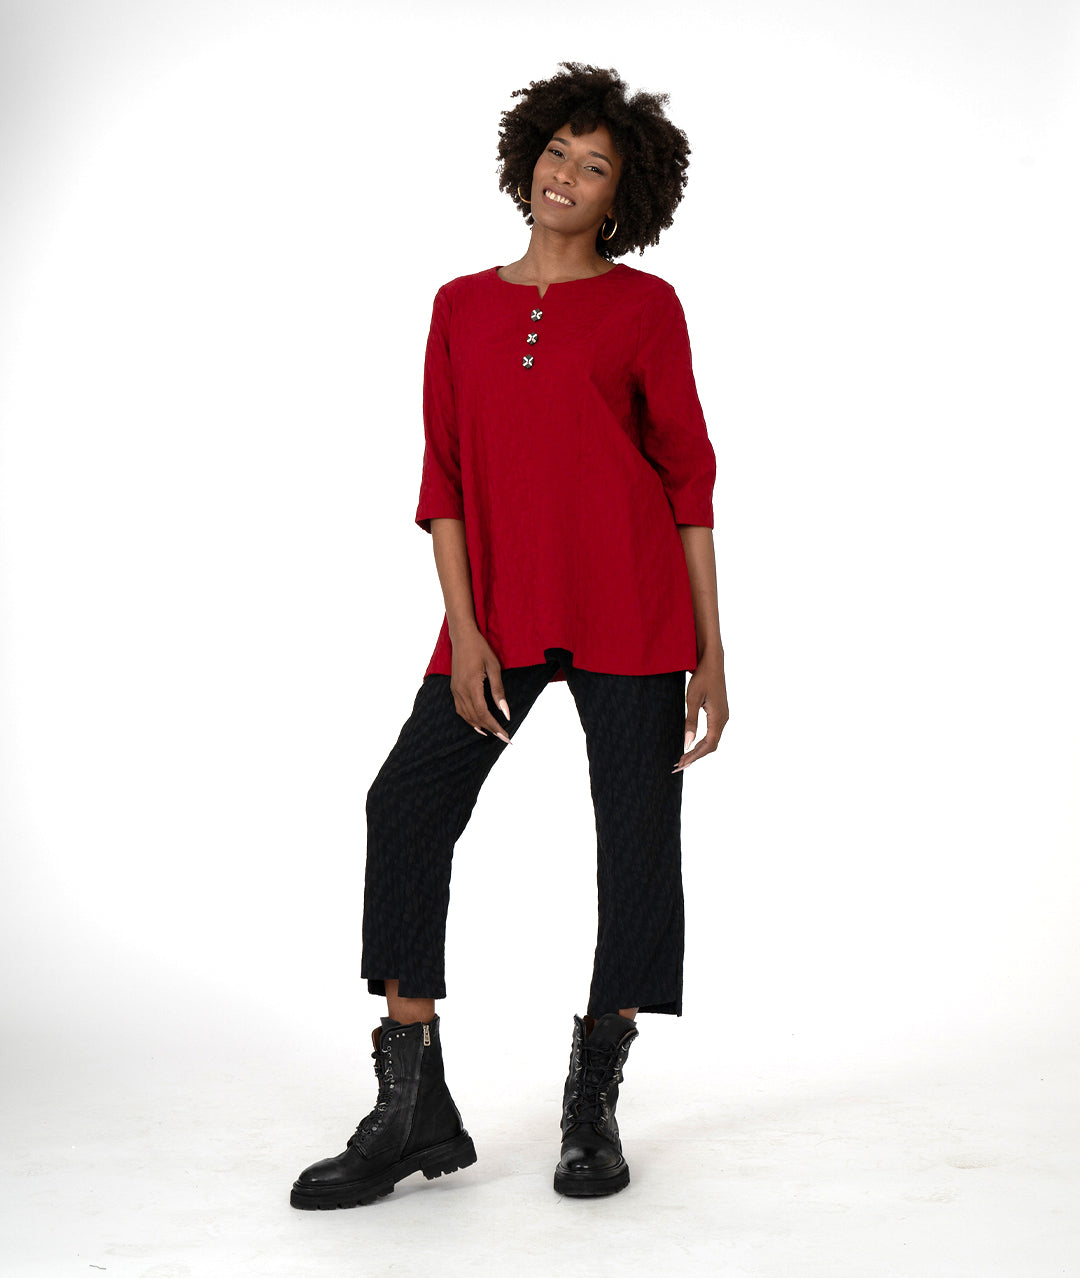 model in a black slim pant and red top, both with asymmetrical hems